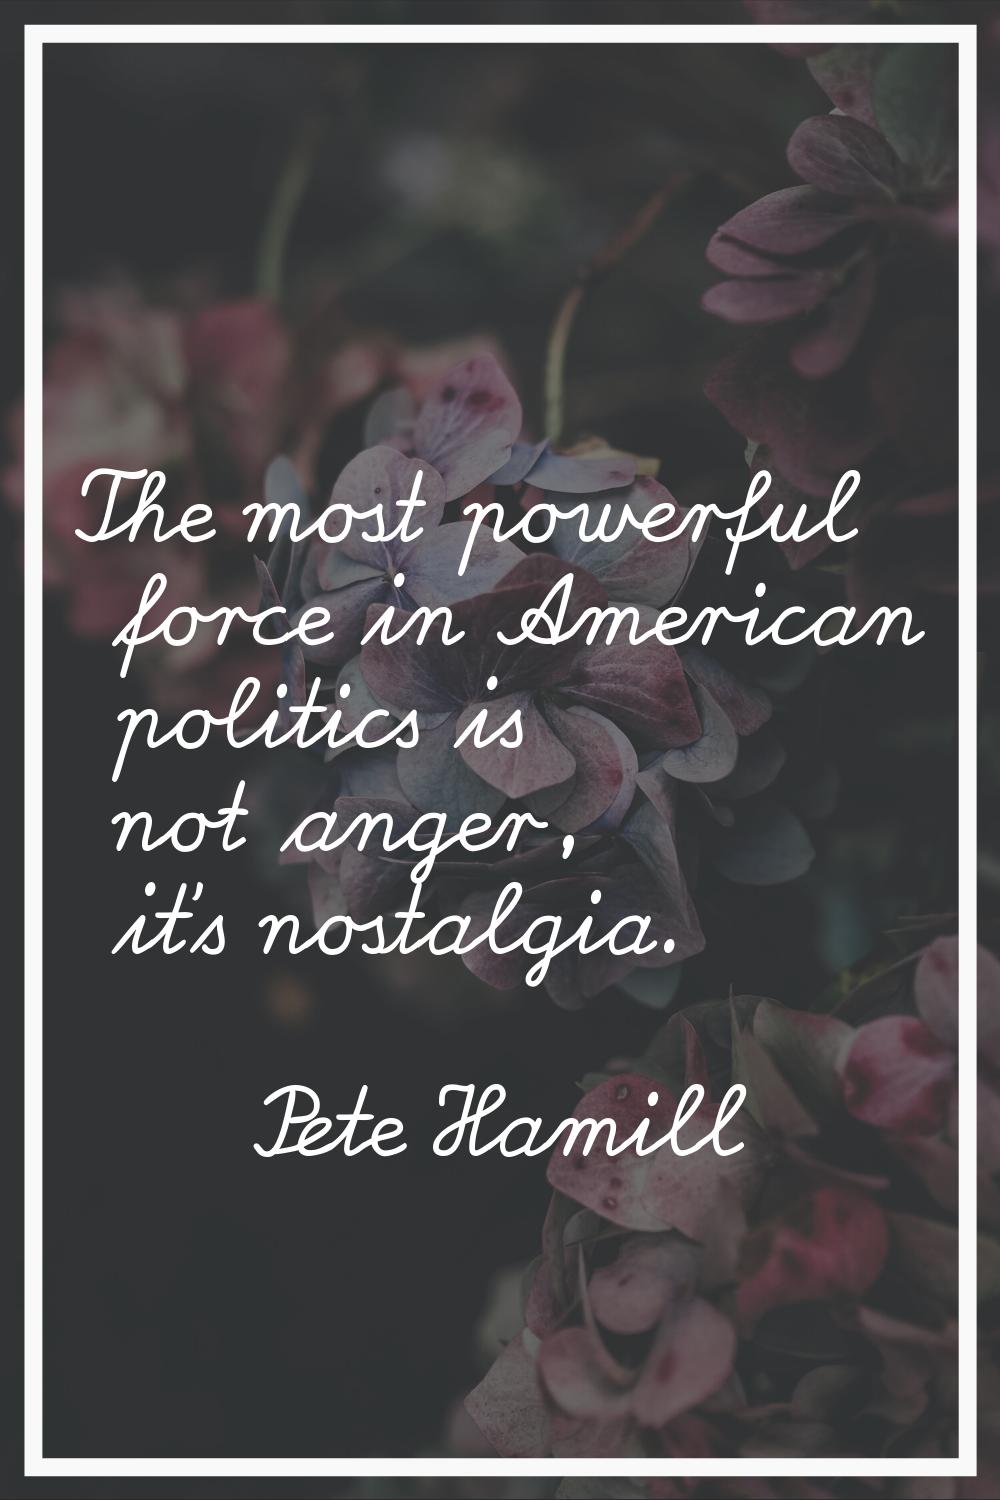 The most powerful force in American politics is not anger, it's nostalgia.